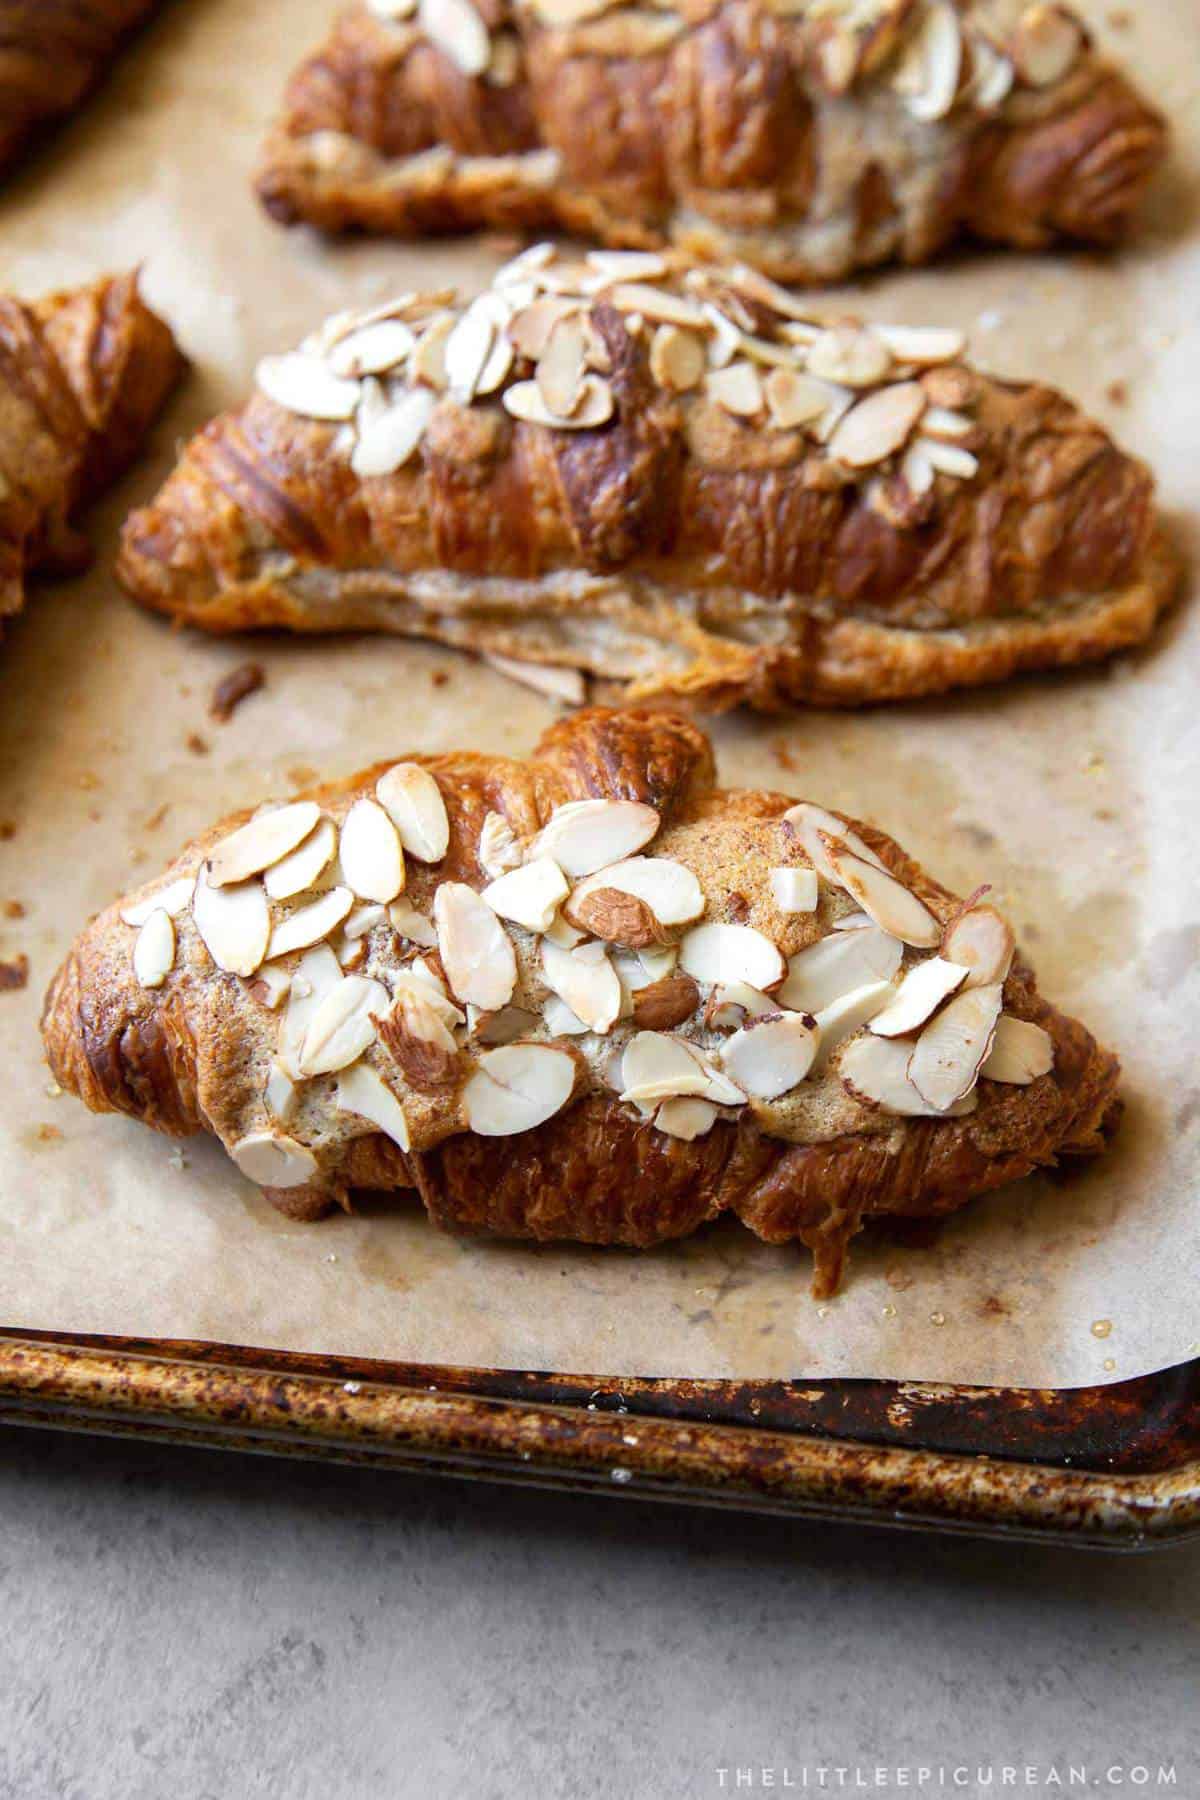 Kitchen Sanctuary on X: These Almond croissants are stuffed with